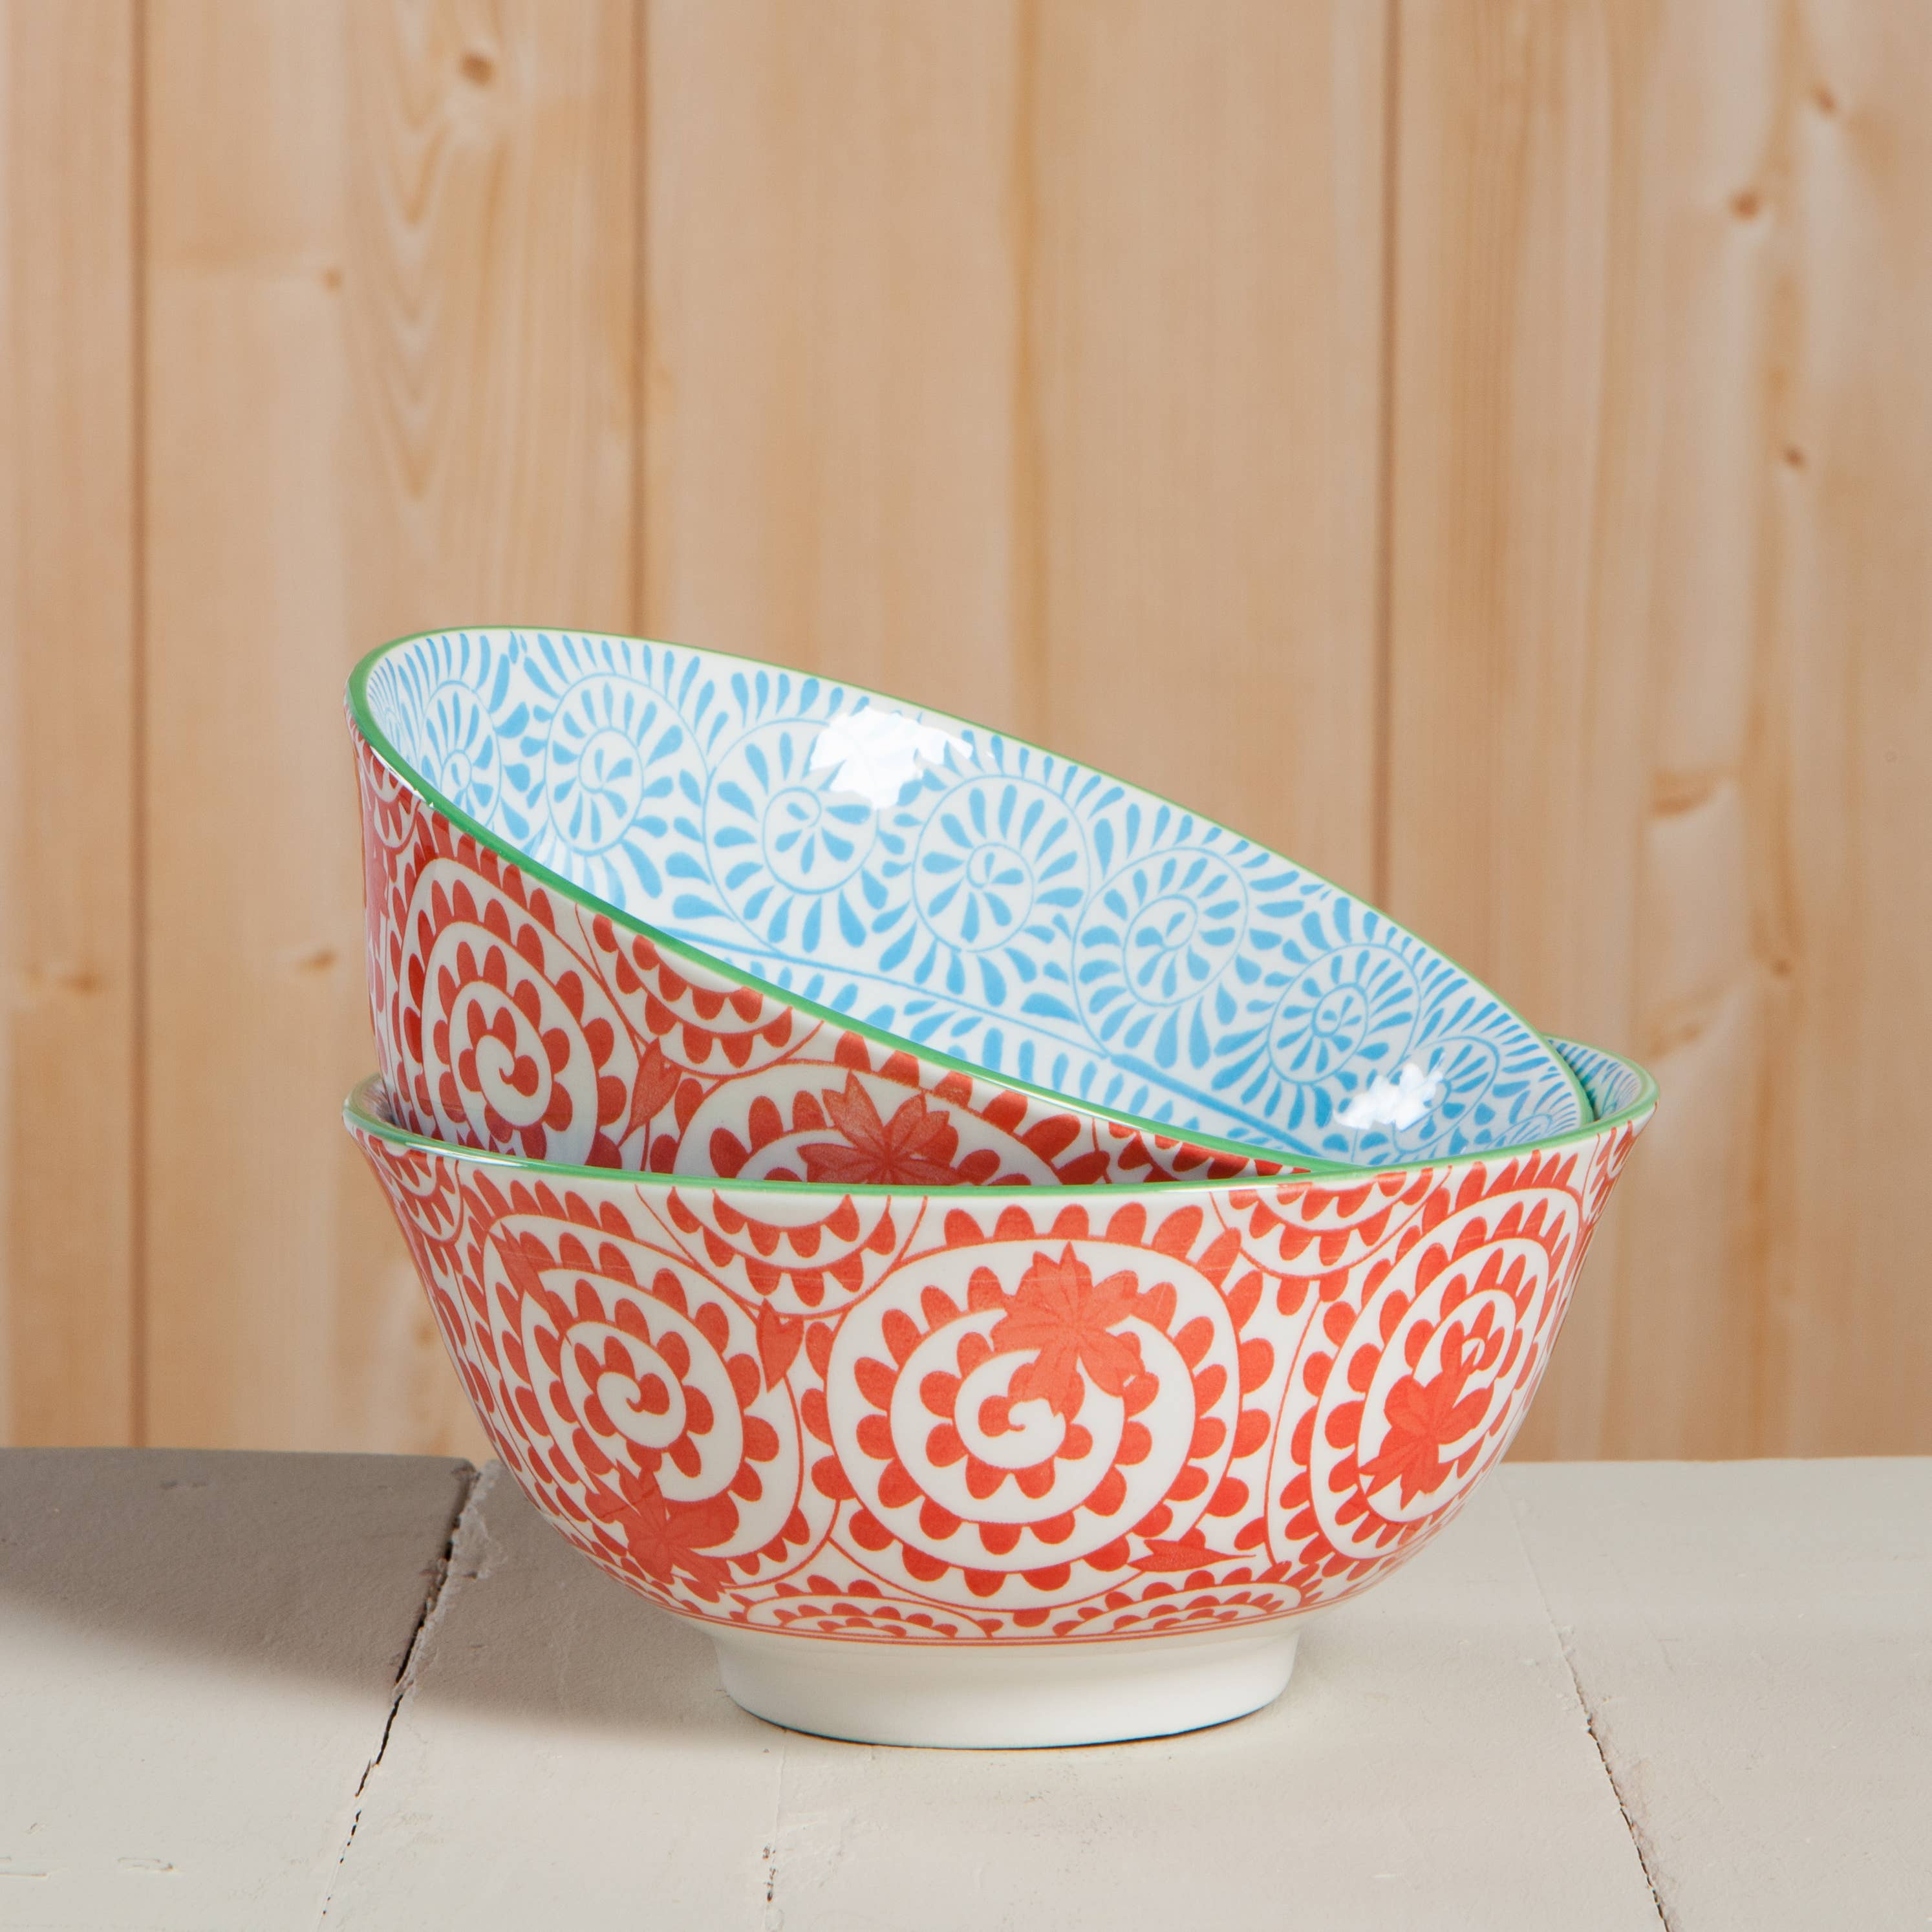 Now Designs by Danica - Orange and Blue Swirls Stamped Bowl 6 inch